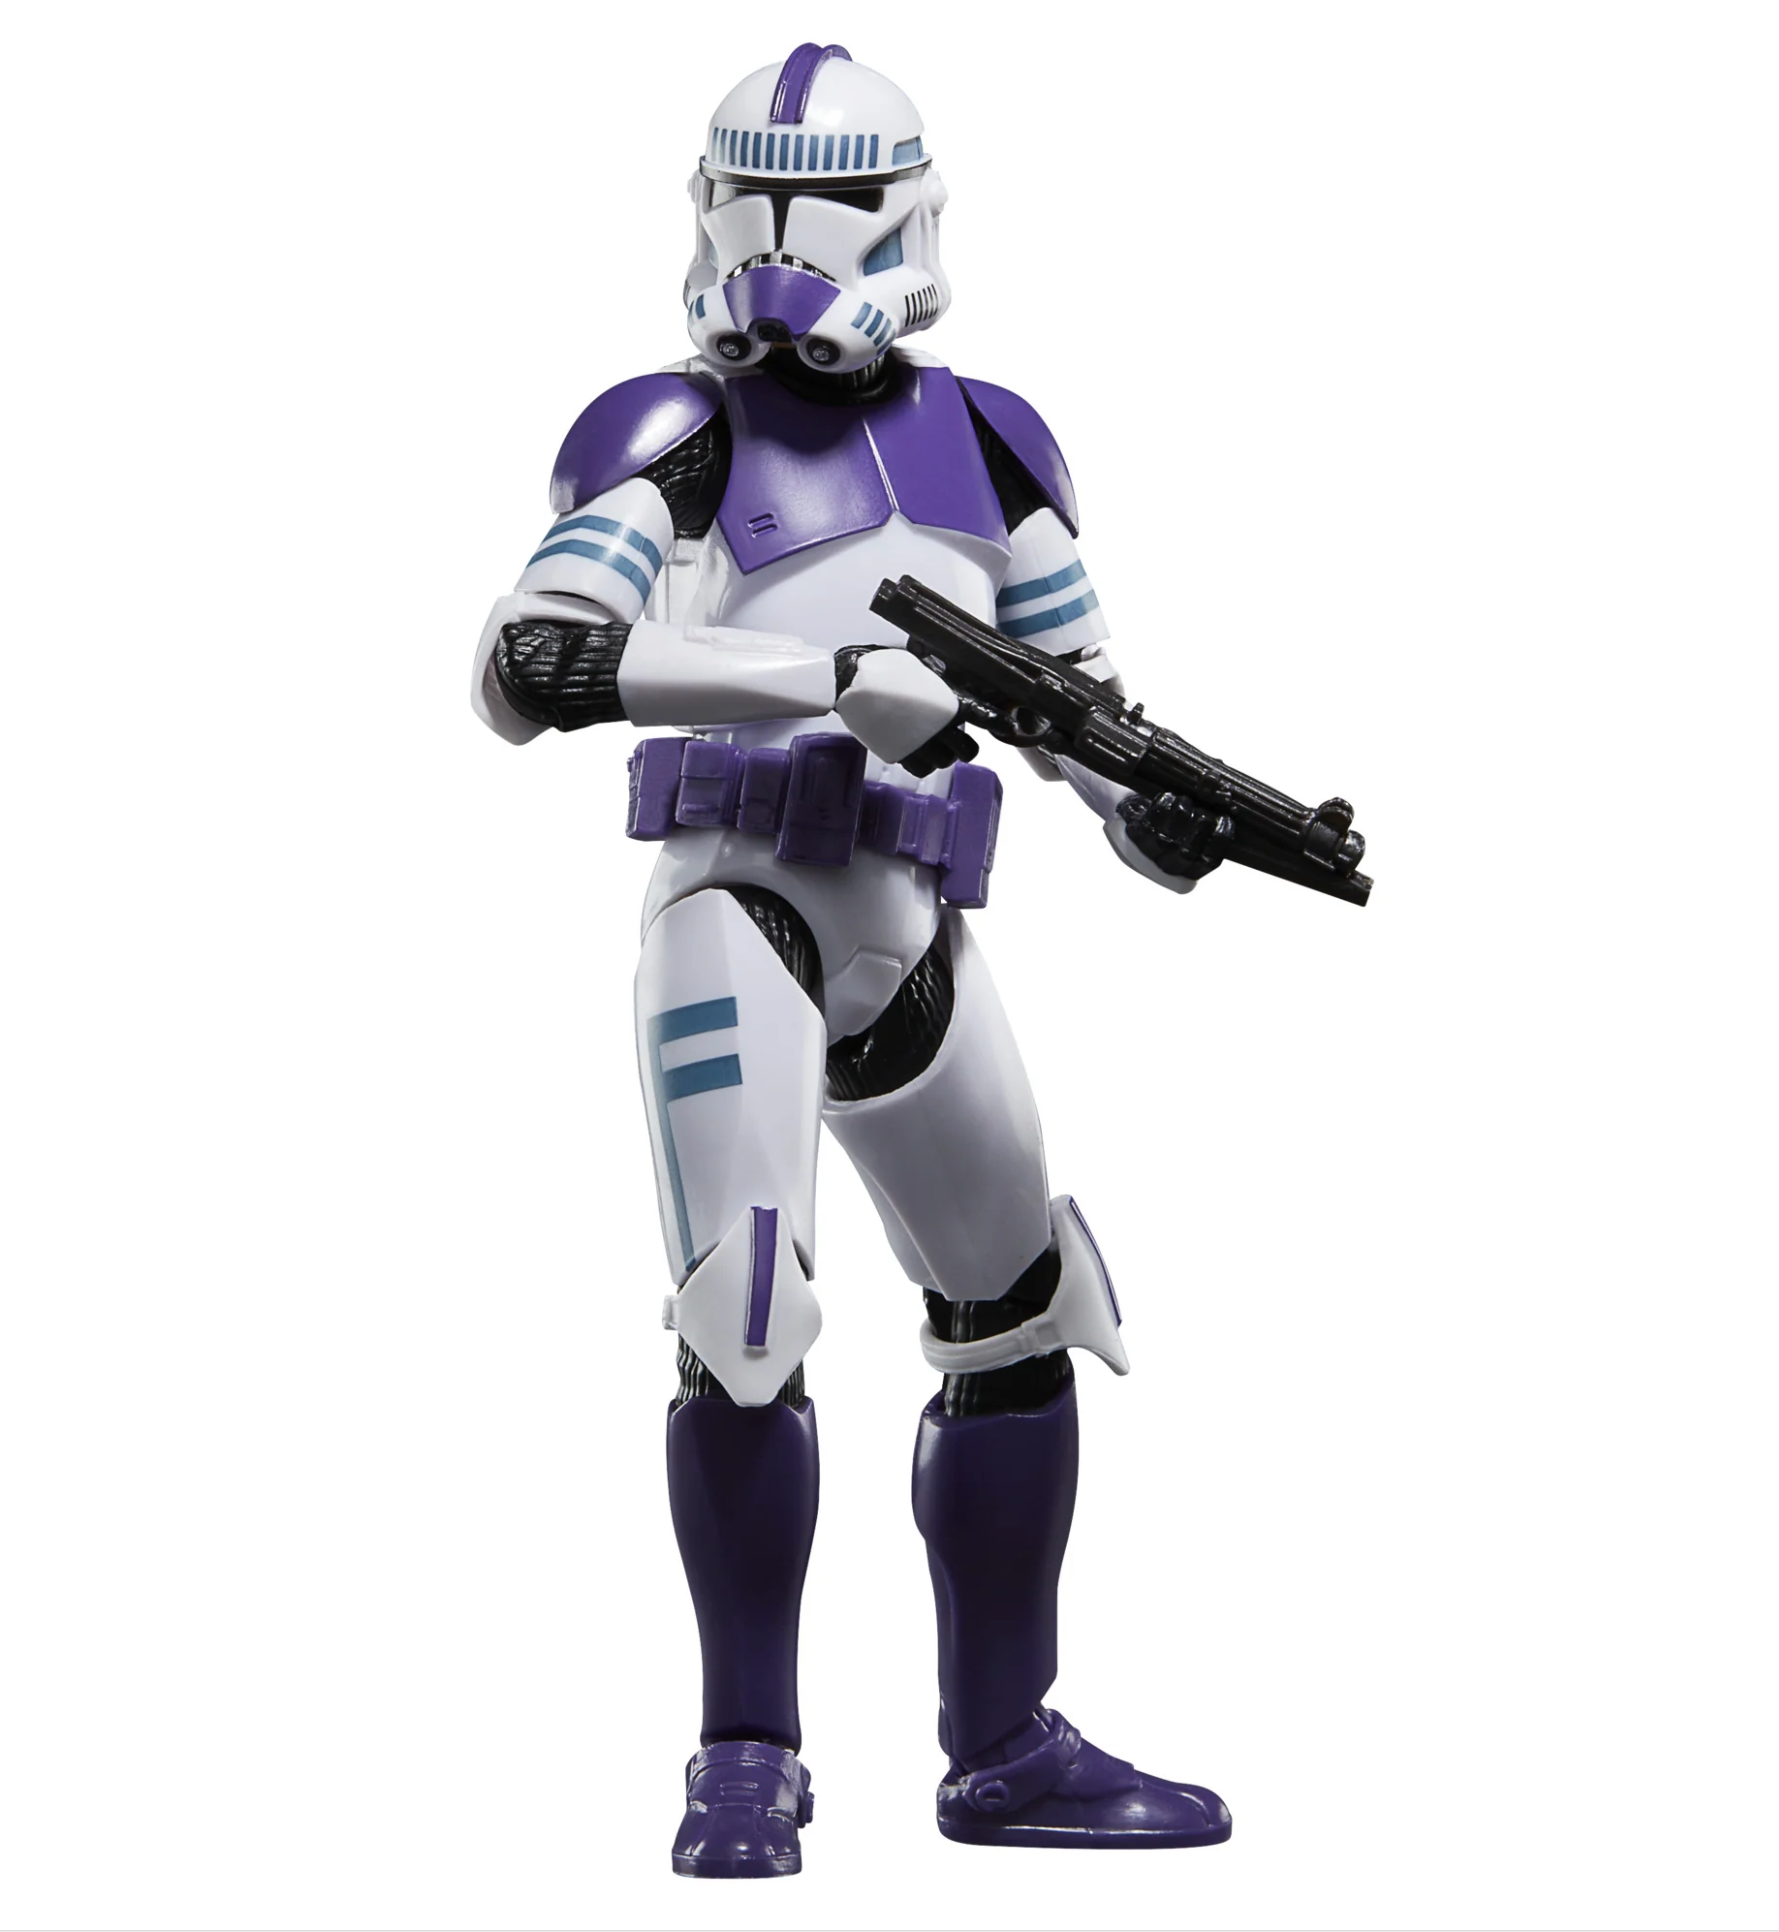 https://static.wikia.nocookie.net/starwars/images/1/15/187LegionCloneTrooper-Hasbro.png/revision/latest?cb=20231031031124